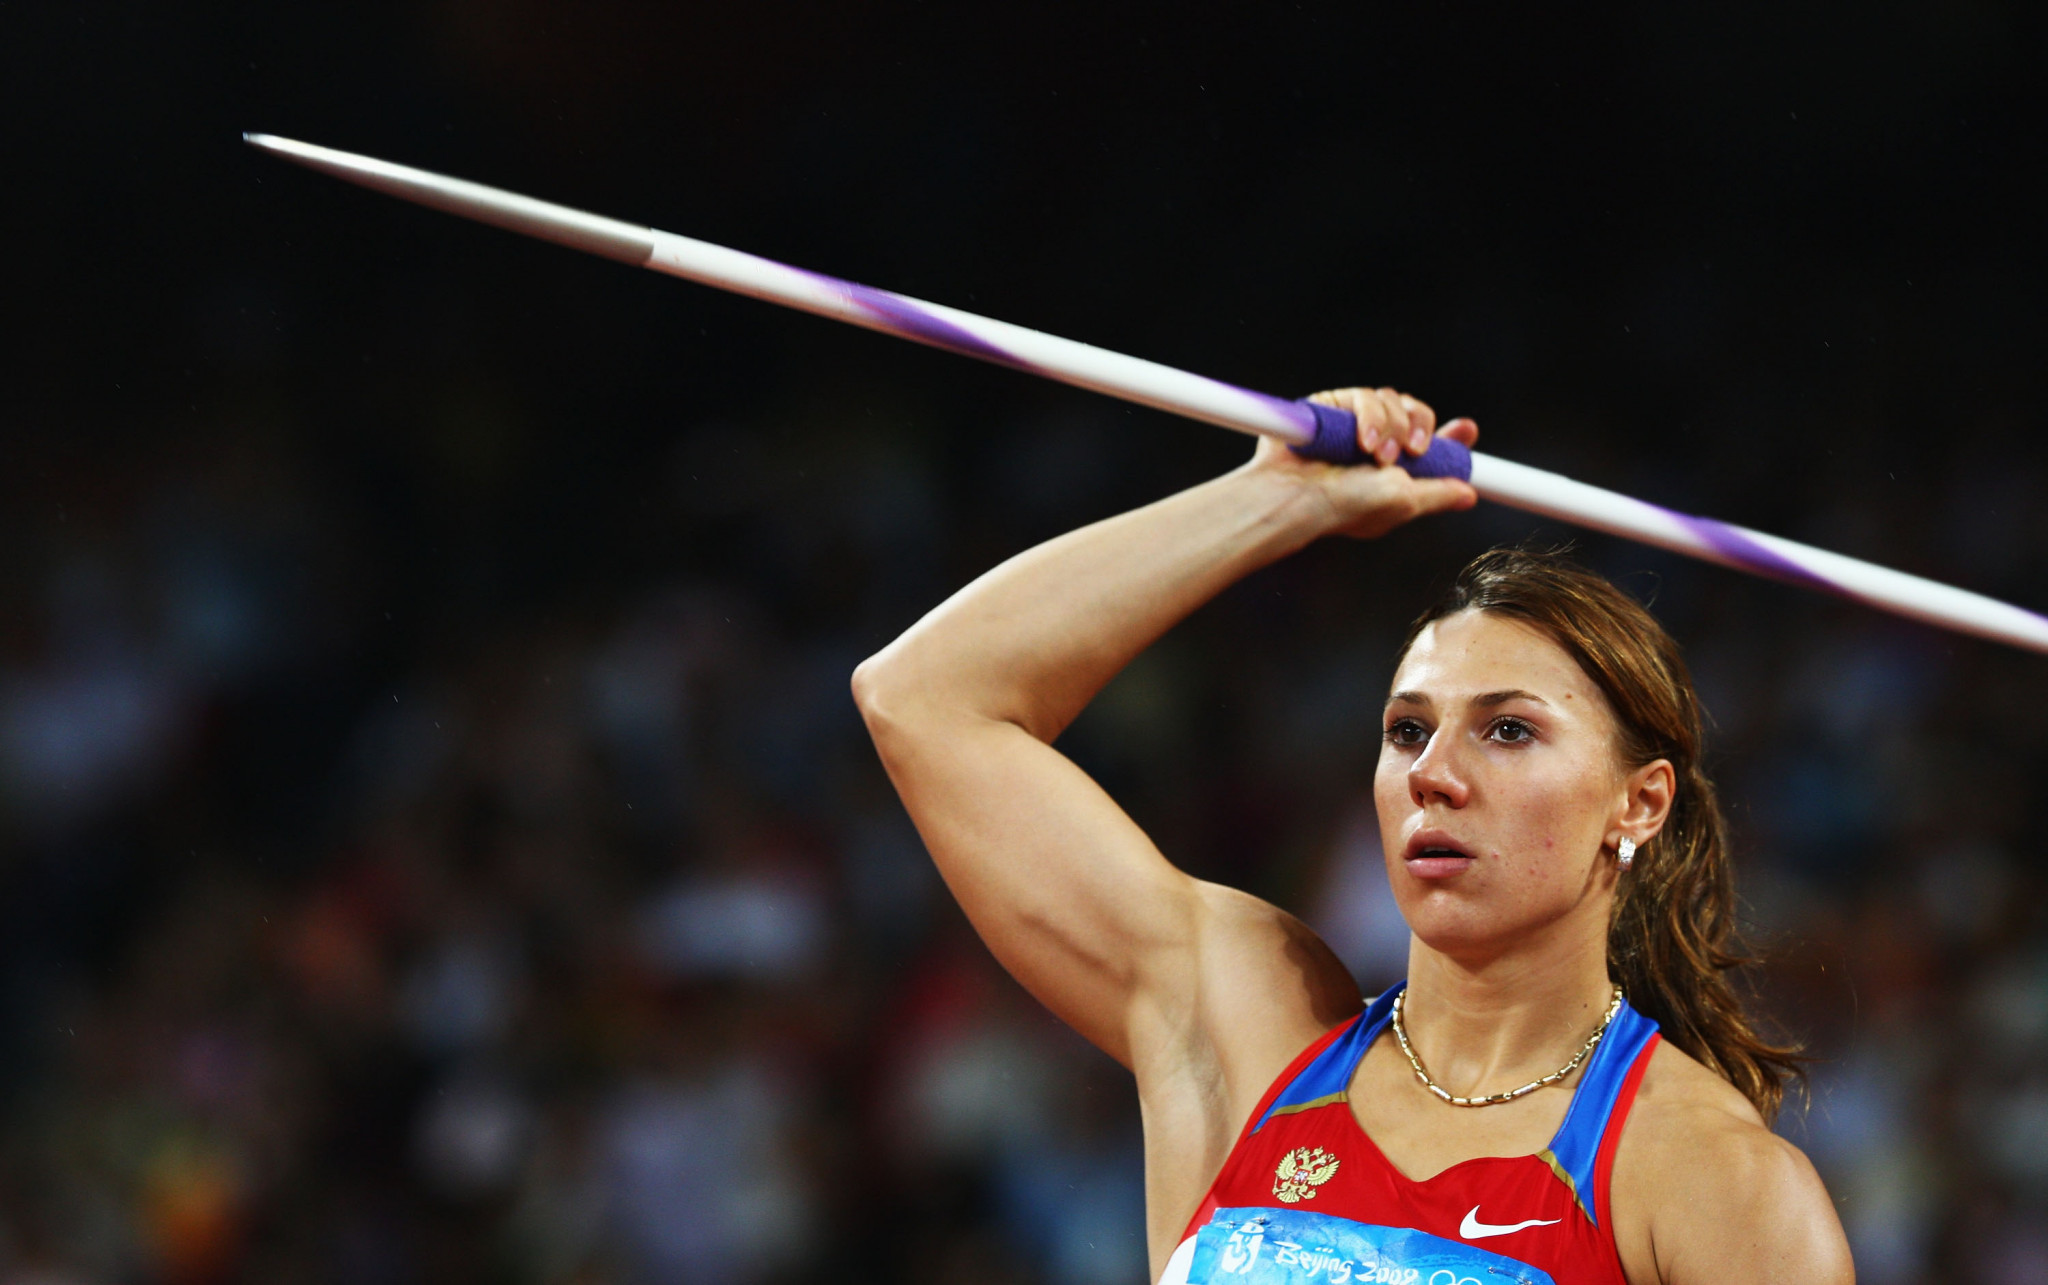 Maria Abakumova was one of three athletes to fail in the appeal against positive re-tests from Beijing 2008 and London 2012 ©Getty Images